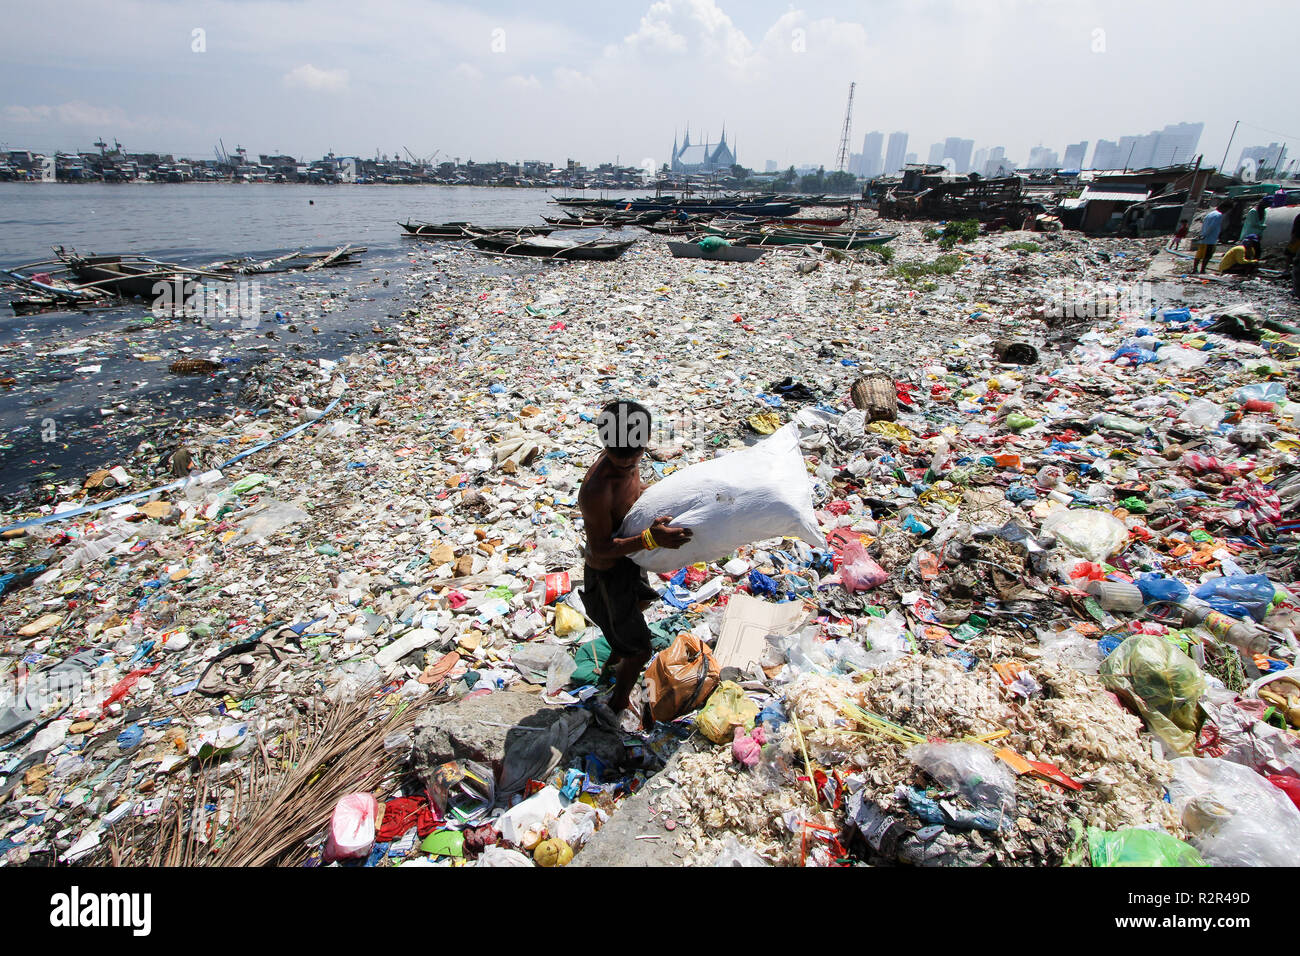 A scavenger collects recyclable waste materials from the sea of garbage that makes up a portion of the polluted bayside in Manila, Philippines. Stock Photo